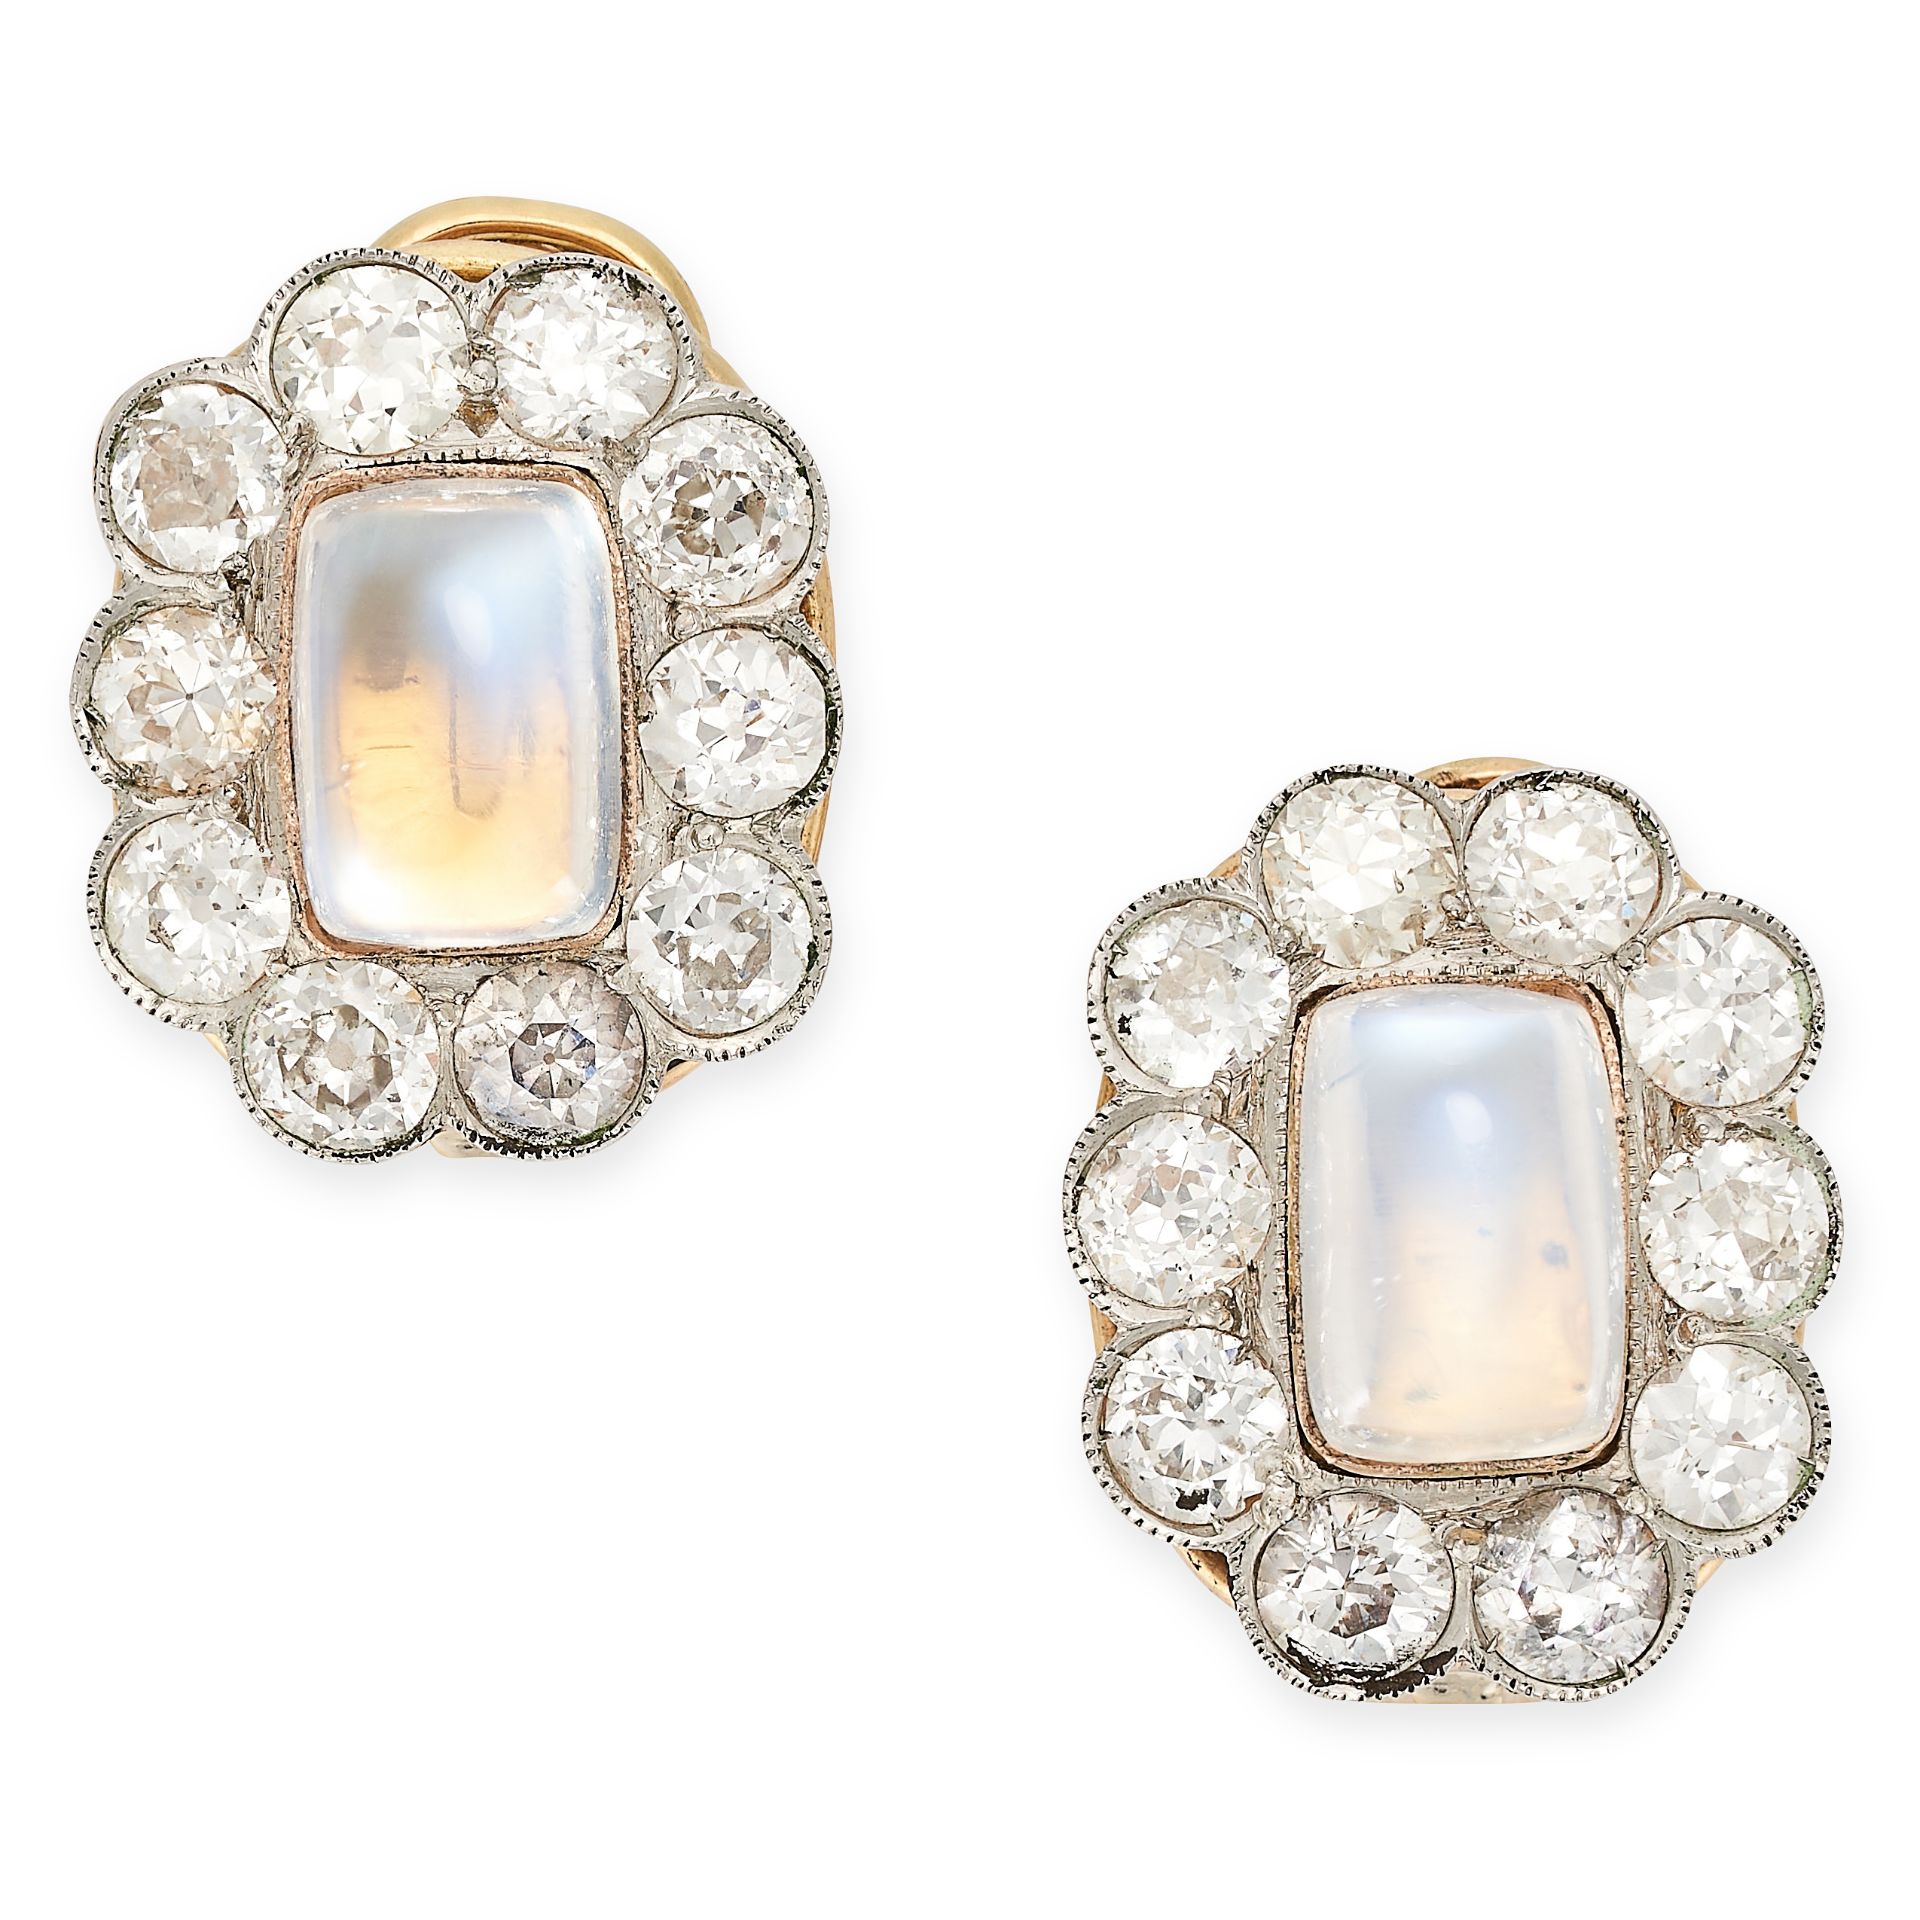 A PAIR OF MOONSTONE AND DIAMOND EARRINGS in yellow gold and platinum, each set with a cushion shaped